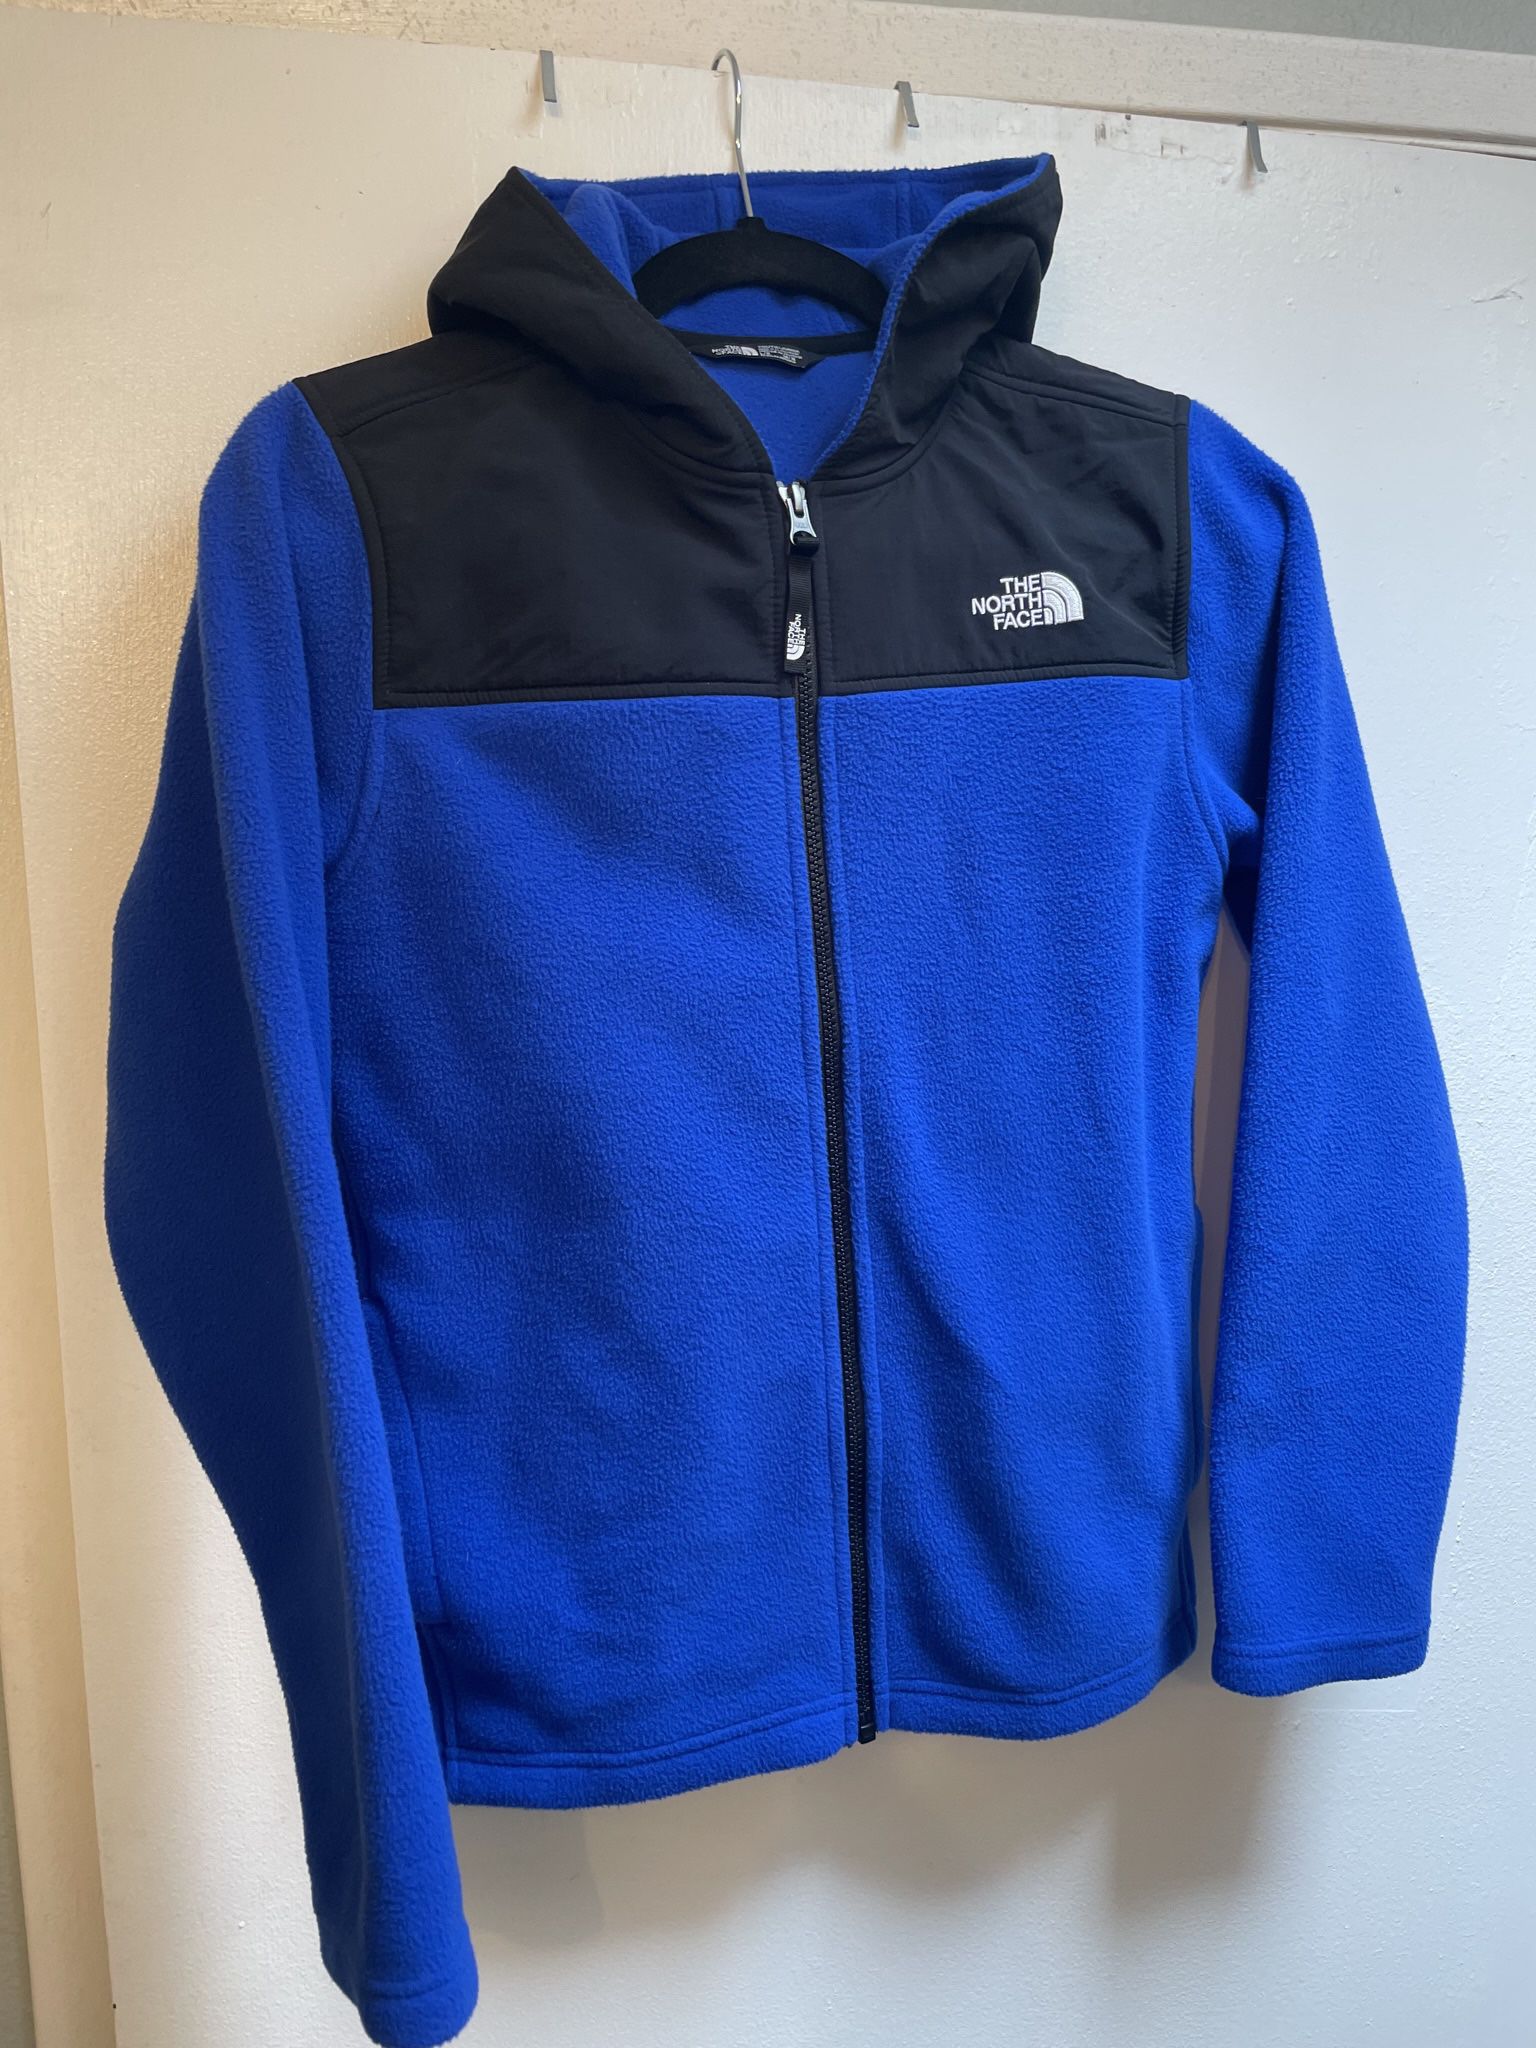 North Face Youth Large Full Zip Hoodies - Blue & Red